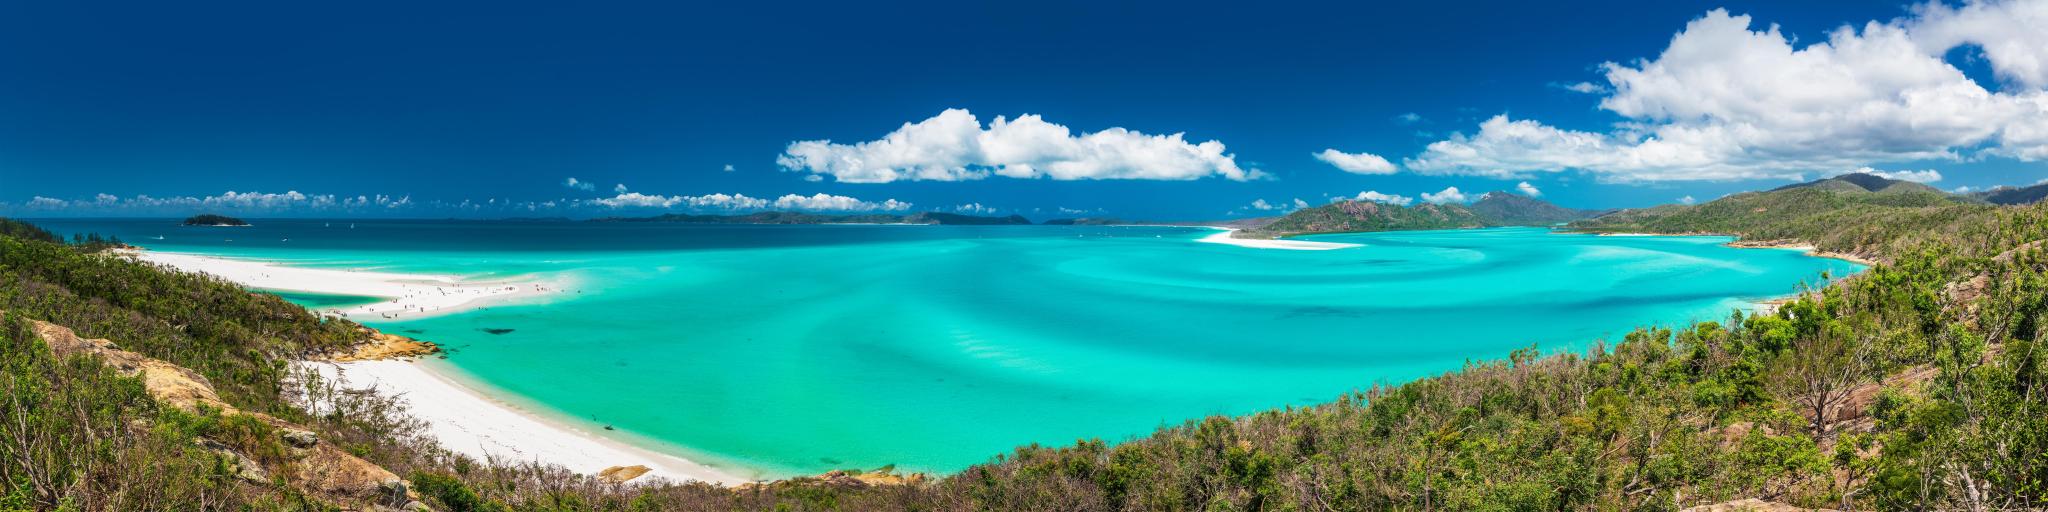 Panoramic view of Whitehaven Beach in the Whitsunday Islands, Queensland Australia